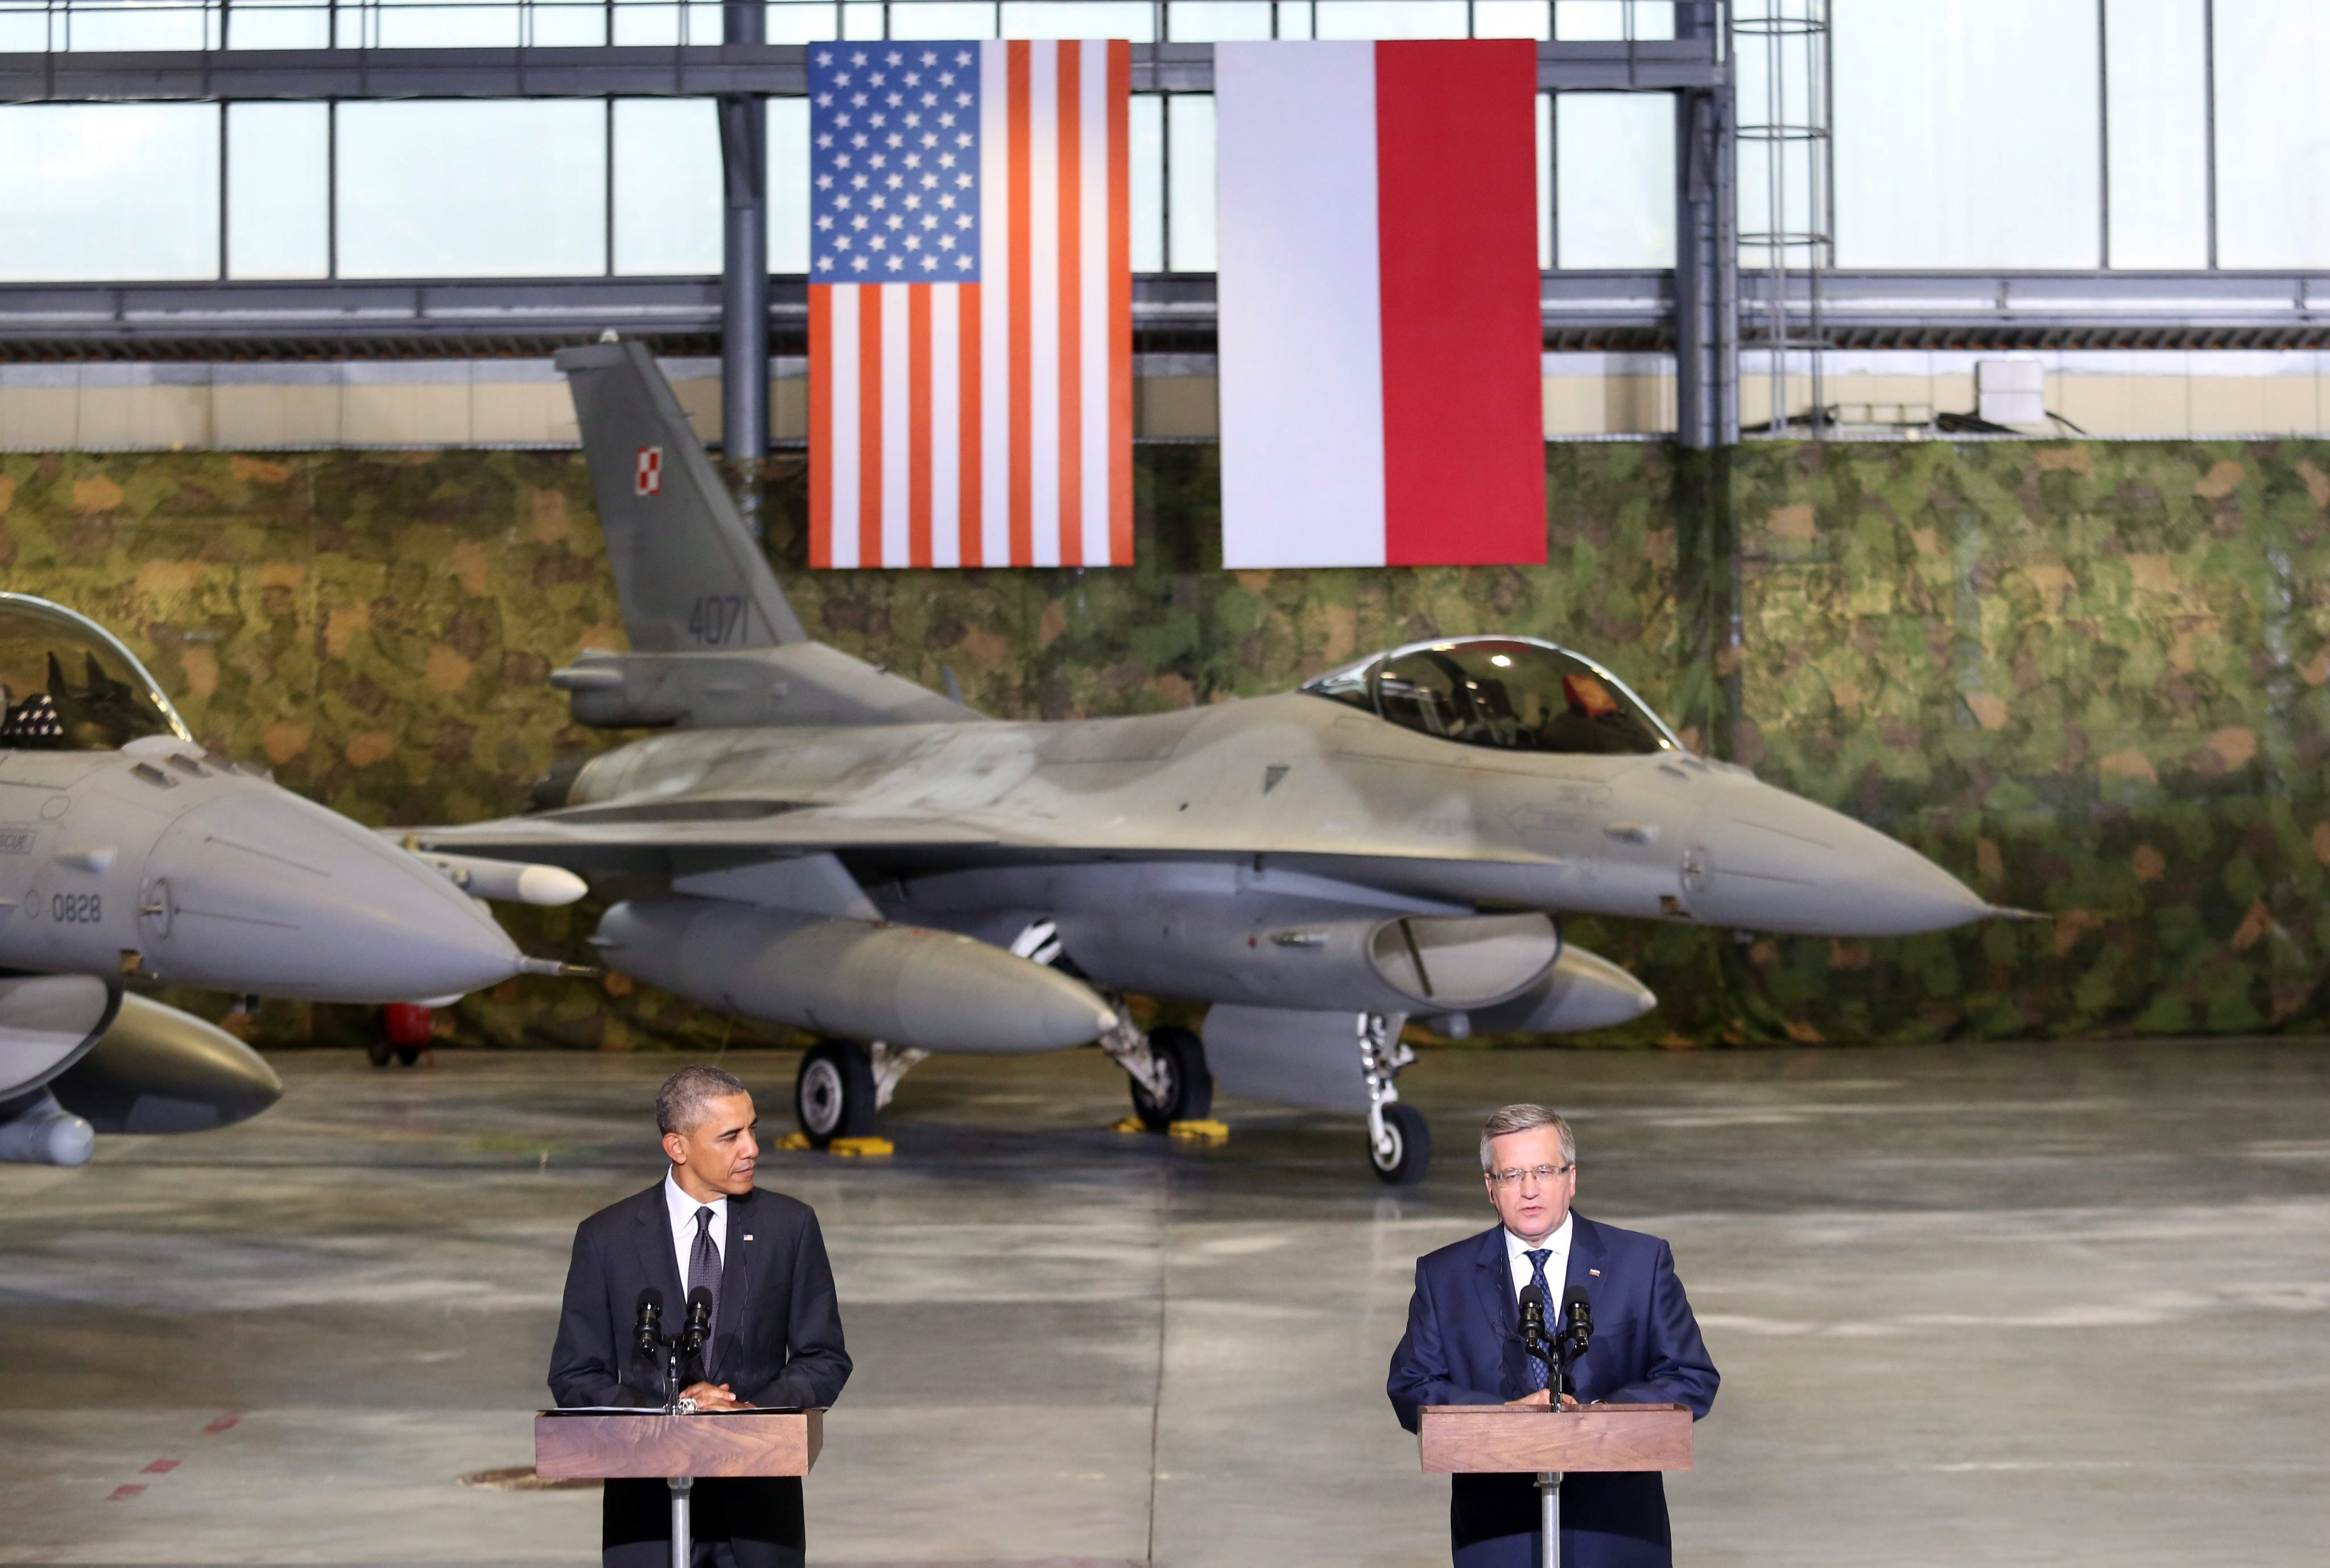 President of Poland Bronislaw Komorowski (R) and U.S. President Barack Obama (L) attend a meeting with Polish and US F-16 fighters pilots at the Okecie Airport in Warsaw, Poland, June 3, 2014. (Leszek Szymanski—EPA)